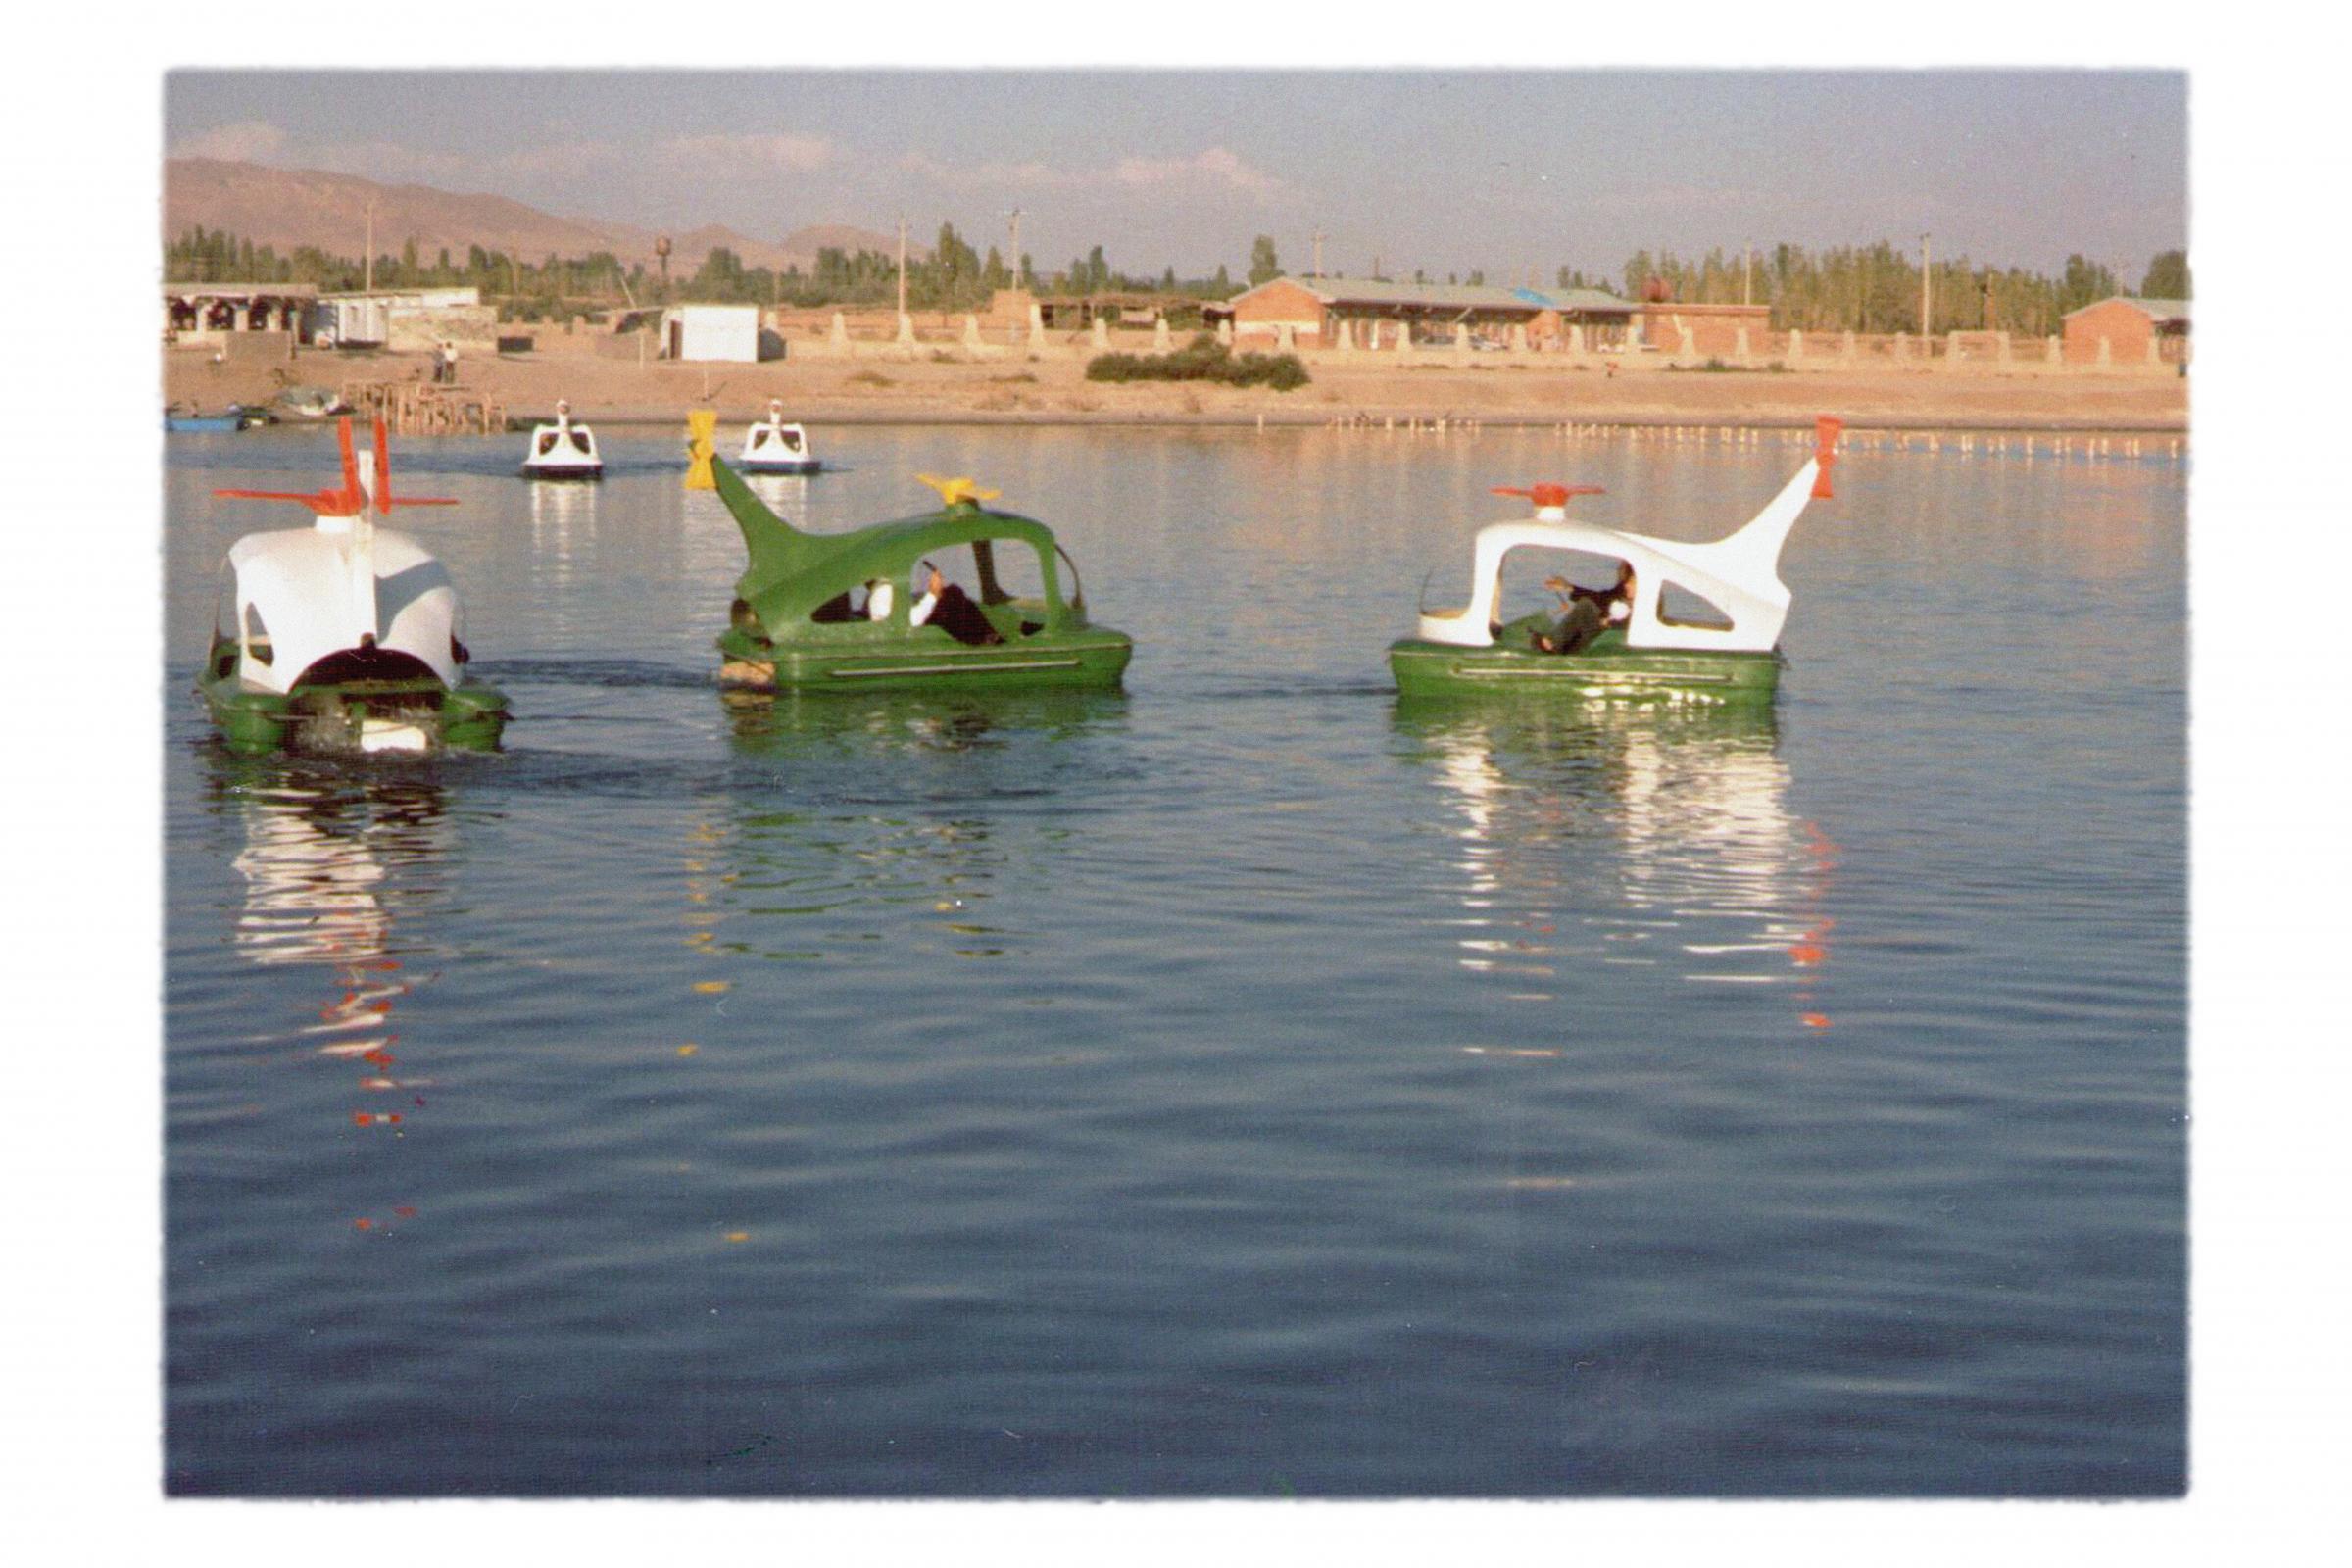 The Eyes of Earth -   My uncle took this picture in 1990 of pedal boats he built and rented out to vacationers...